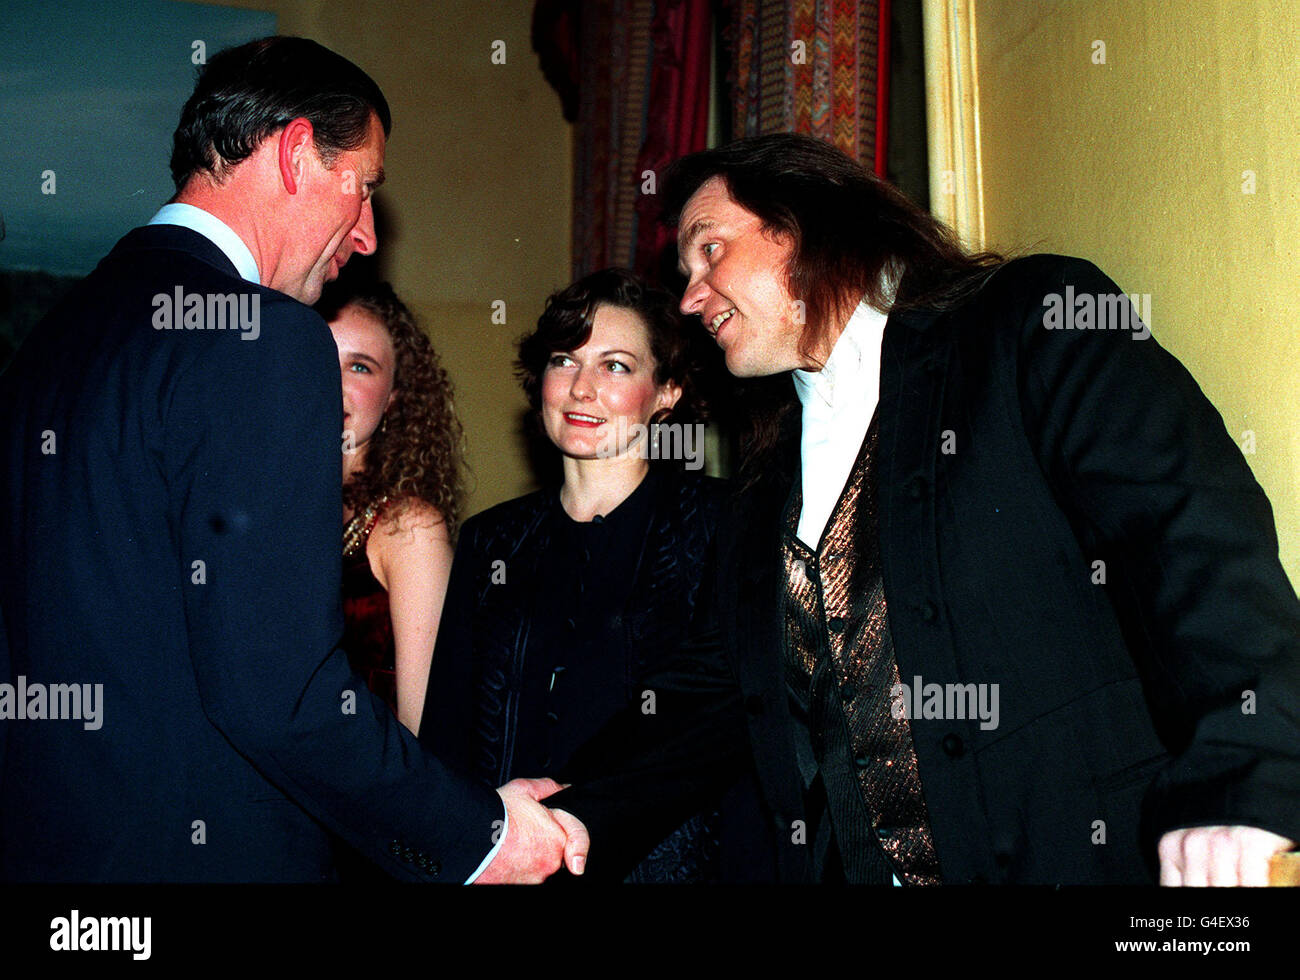 PA NEWS 17/11/94 THE PRINCE OF WALES SHAKES HANDS WITH SINGER Meat Loaf (RIGHT), ACCOMPANIED BY HIS WIFE LESLEY (CENTRE), BEFORE Meat Loaf'S CONCERT IN AID OF THE PRINCE'S TRUST AT THE ROYAL ALBERT HALL, LONDON. Stock Photo